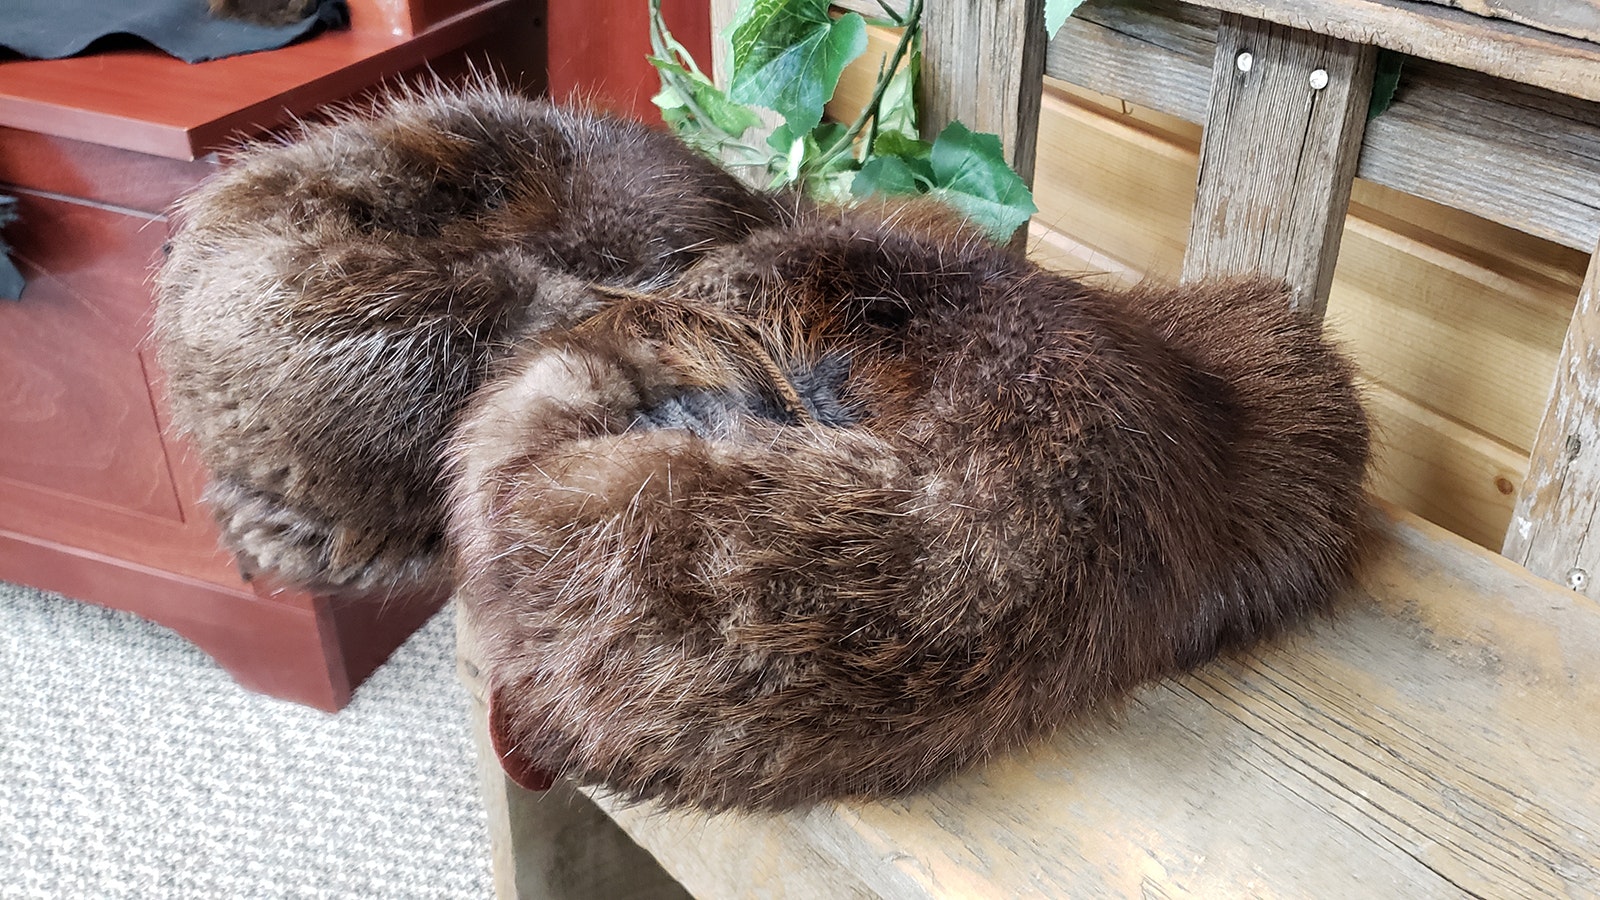 The world's furriest slippers are made of beaver fur, and they're hanging out at Merlin's Hide Out.